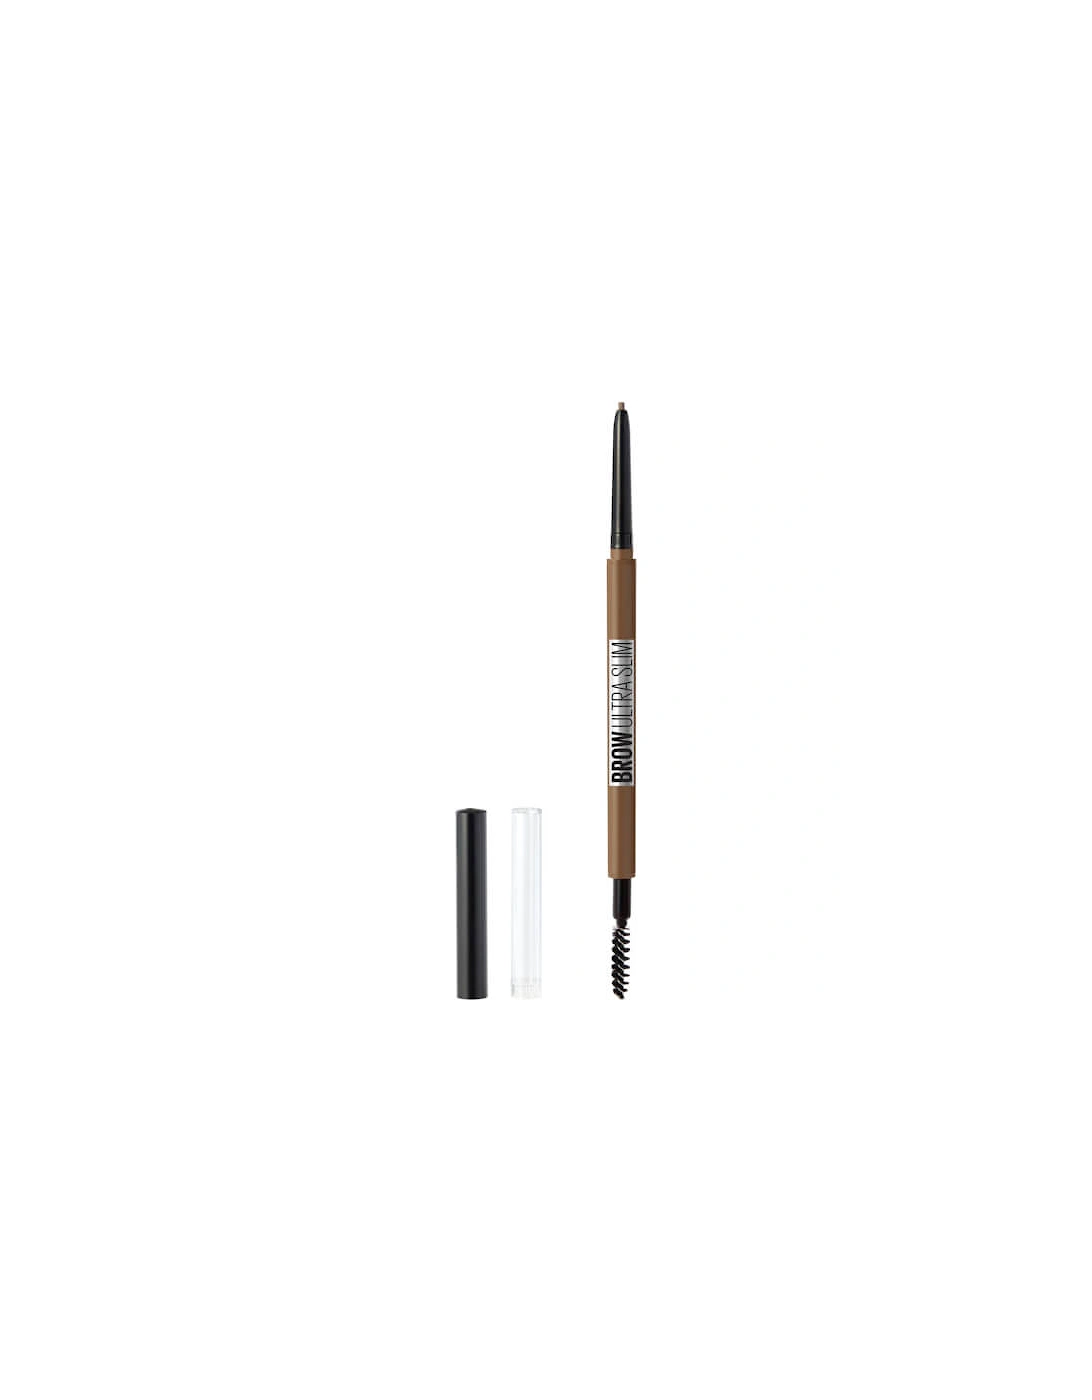 Express Brow Ultra Slim Defining Natural Fuller Looking Brows Eyebrow Pencil - 02 Soft Brown, 2 of 1